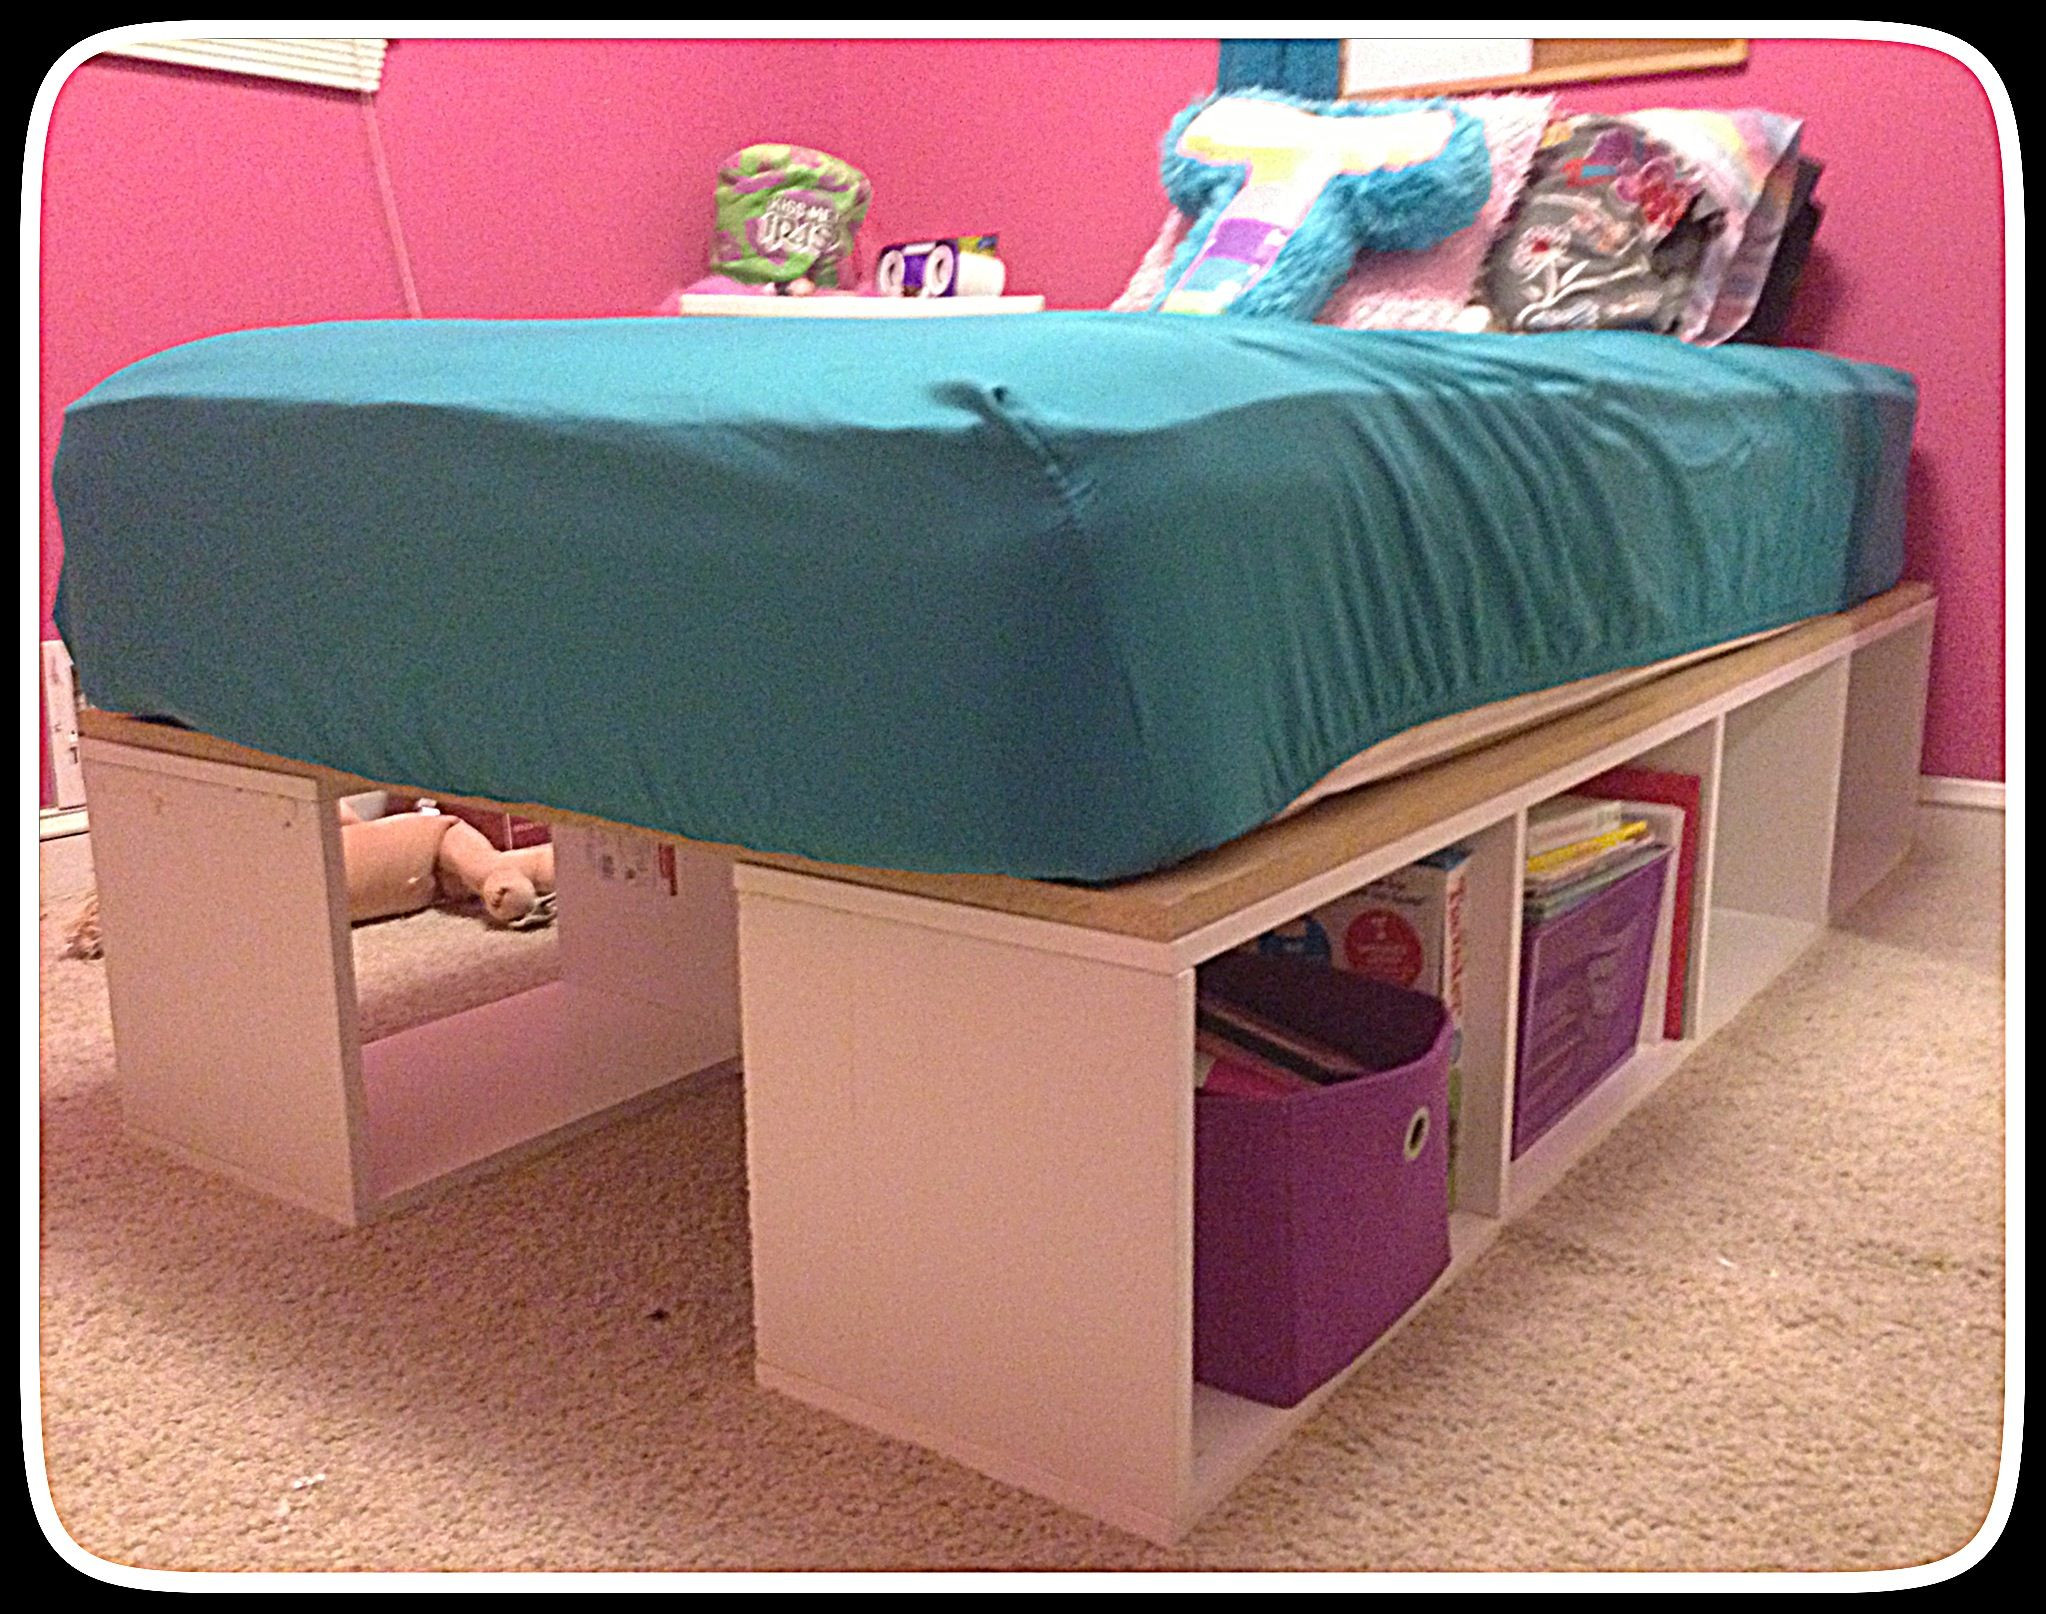 DIY Kids Bed With Storage
 Hand made storage bed frame Love it